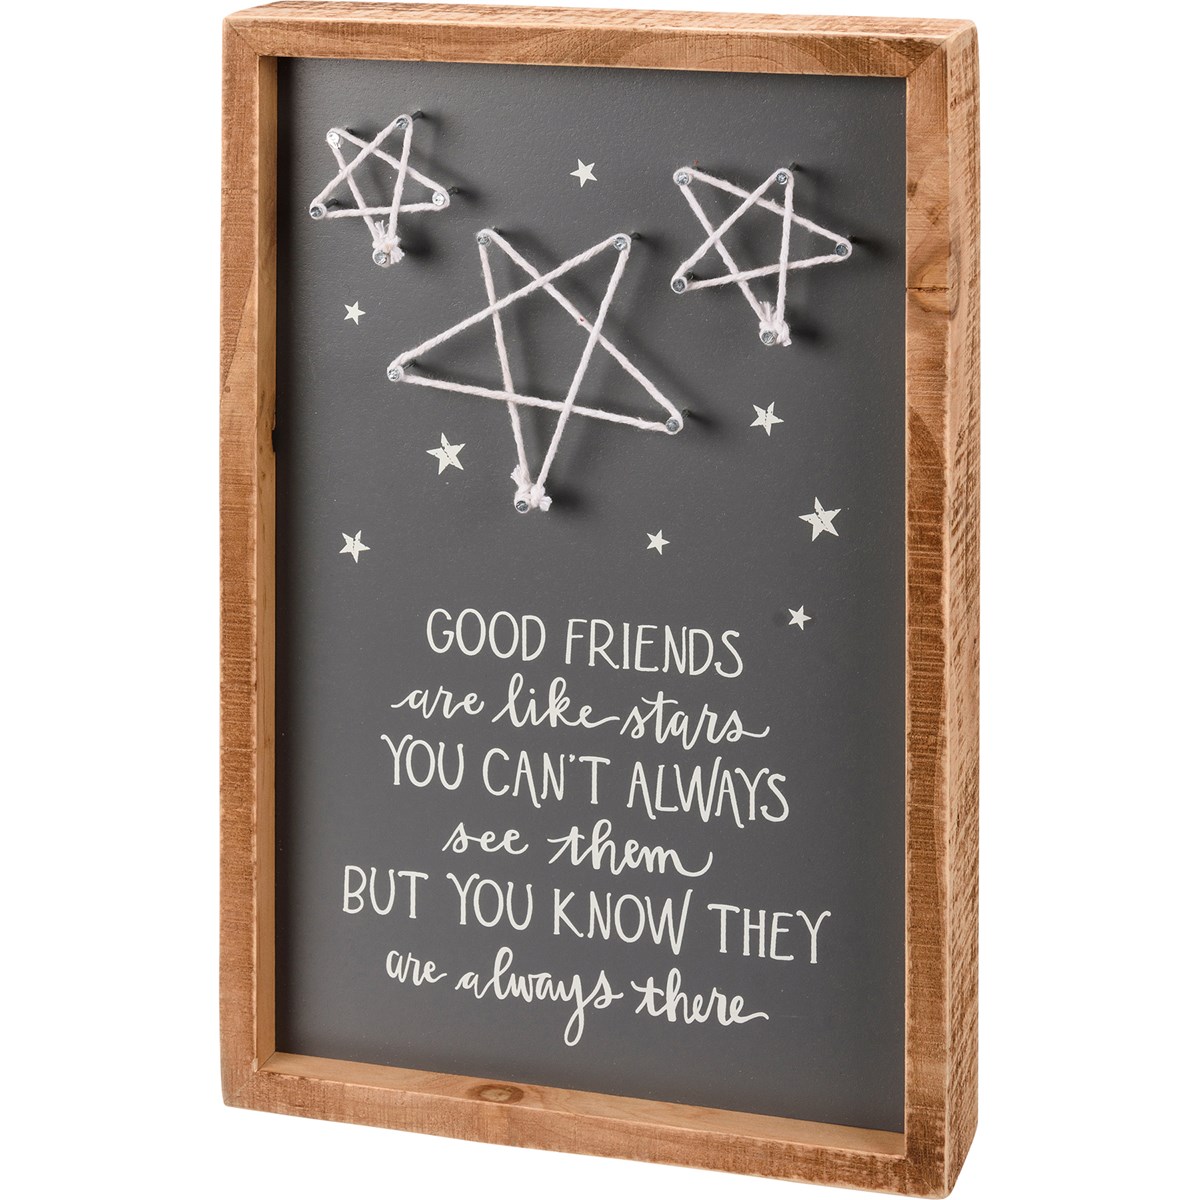 Good Friends Are Like Stars Inset String Art - Wood, Metal, String